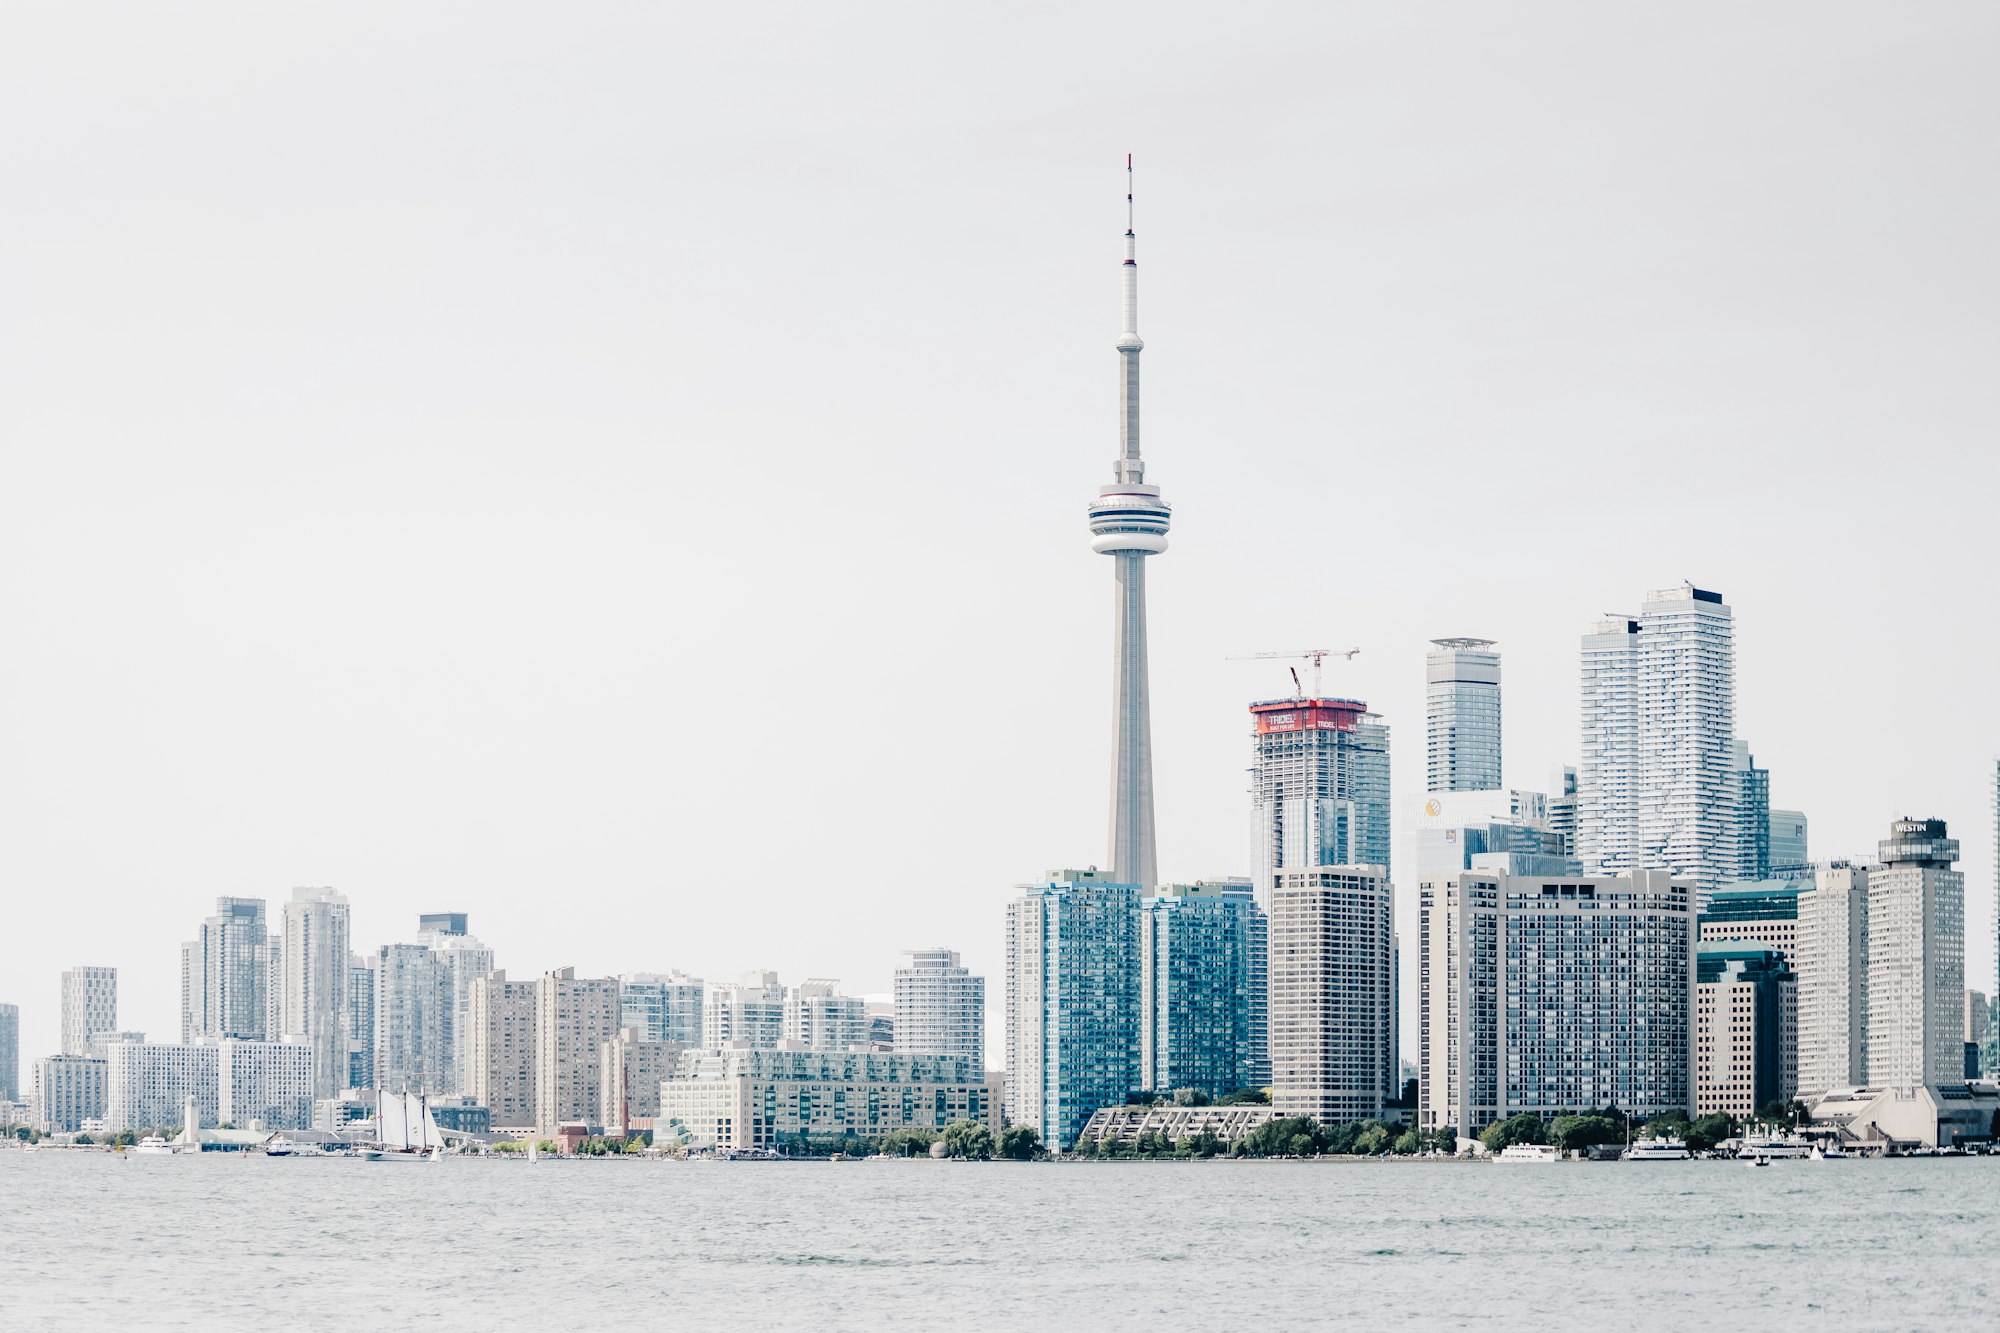 This photo was shot from the boat tour around Toronto islands during photographing the Wedding of another Unsplash contributor: Tim Gouw. That Toronto skyline gets me.